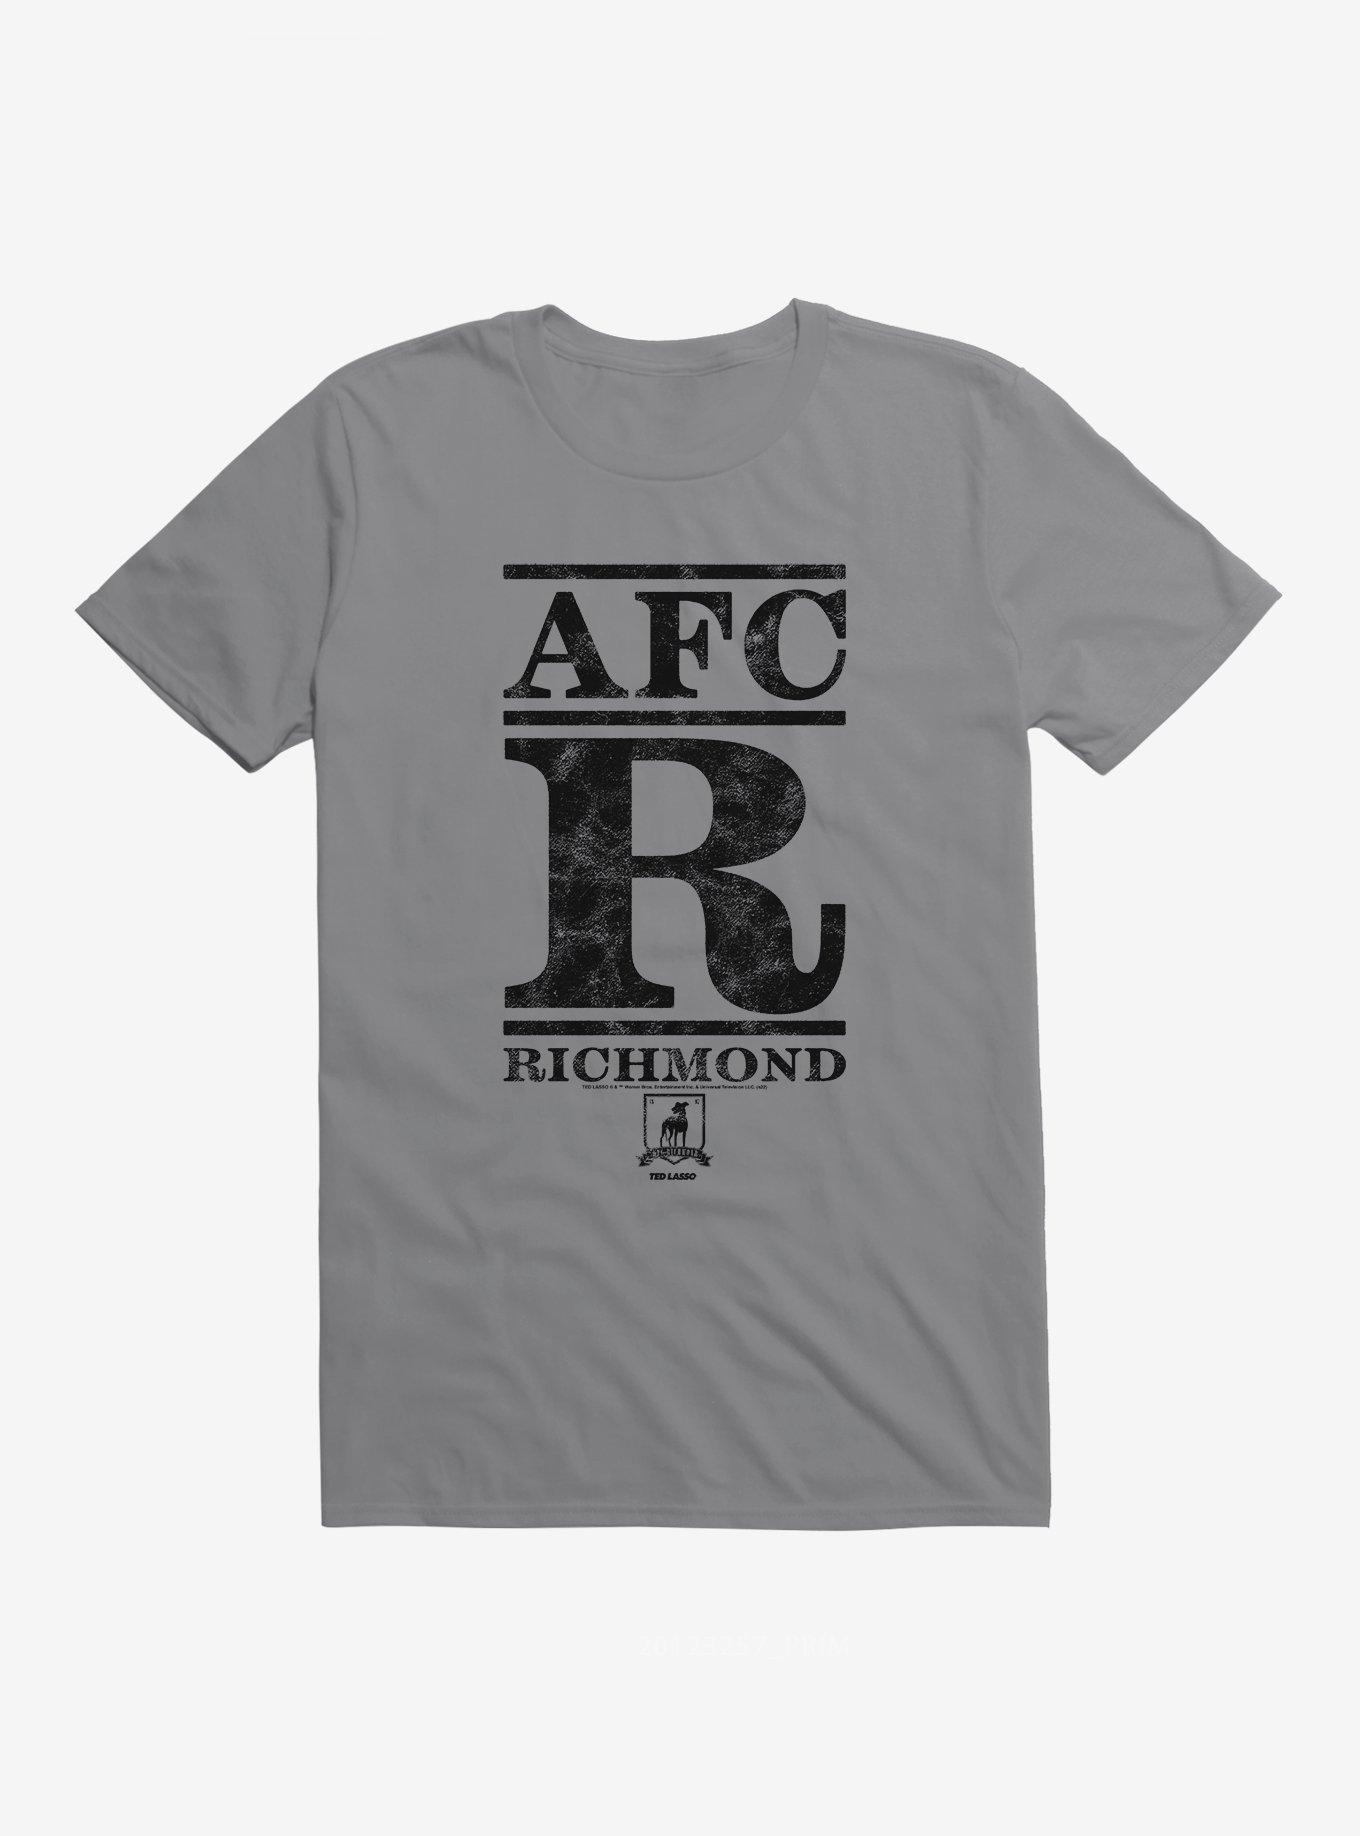 Ted Lasso AFC R Bold T-Shirt, , hi-res